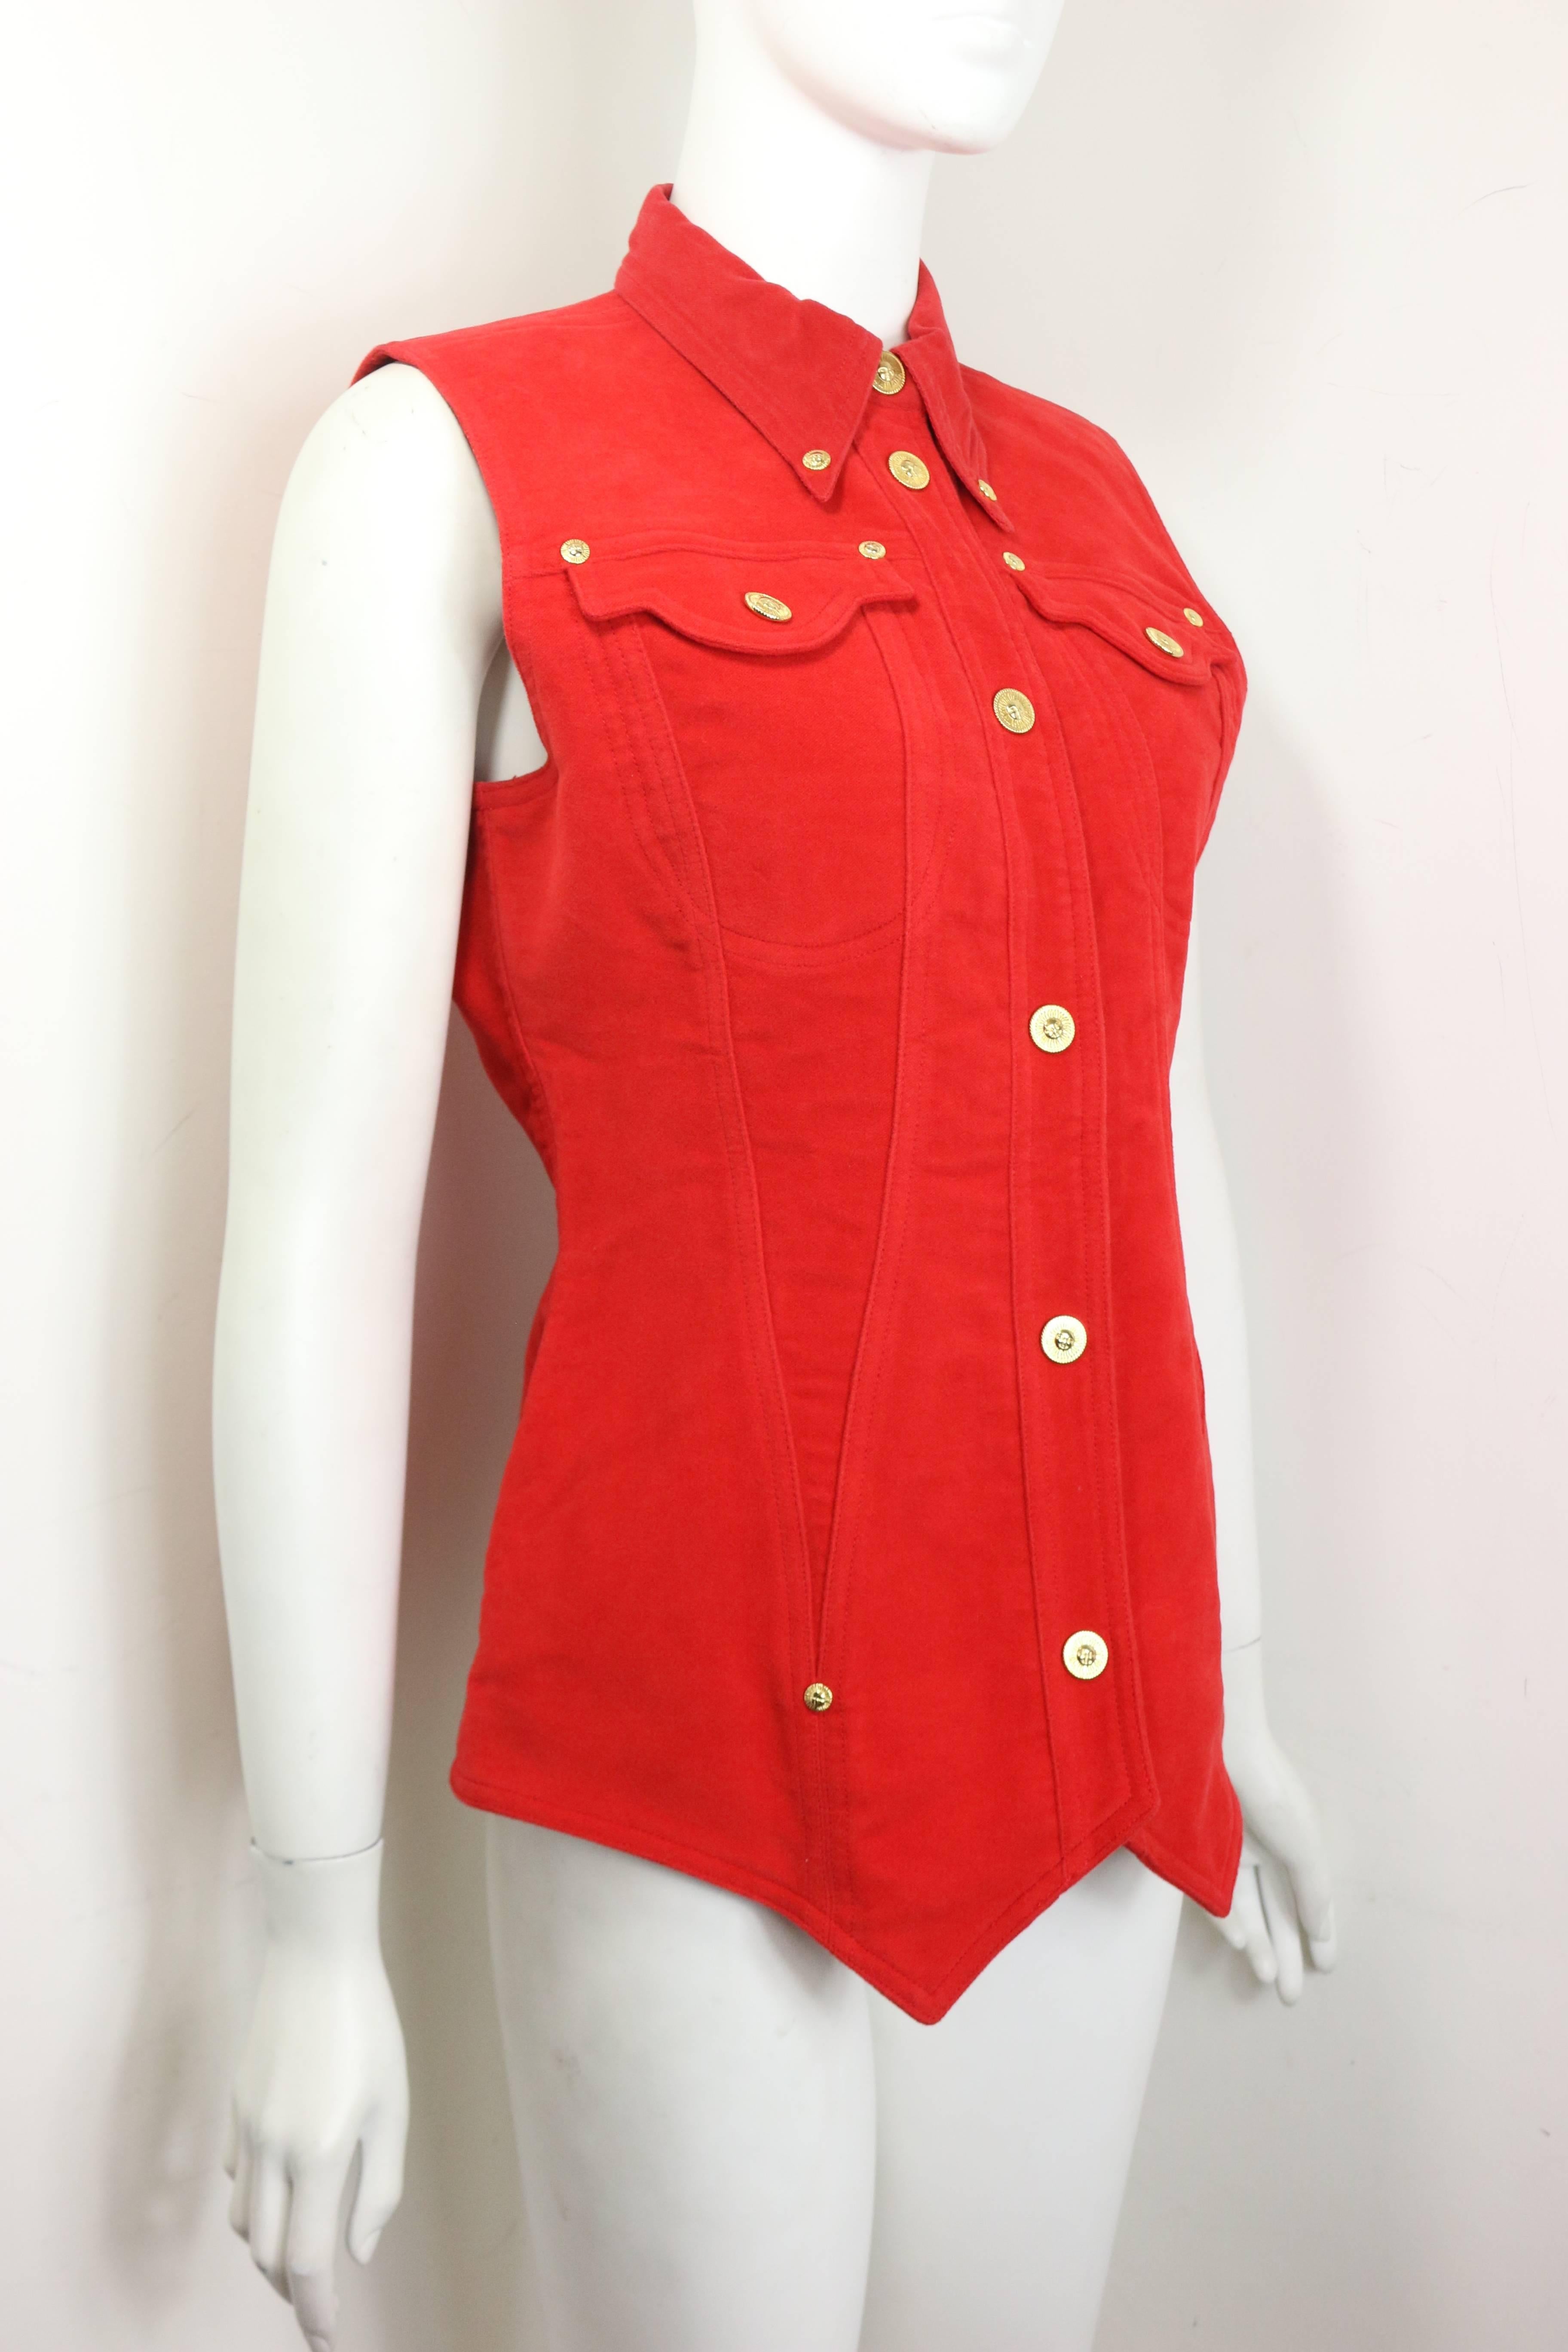 - Vintage 90s Gianni Versace Jeans Couture red cotton vest. 

- Pointy collar embedded with gold toned hardware studs. 

- Gold toned hardware snap buttons closure. 

- Two front flap pockets with gold toned hardware snap buttons closure. 

- Size